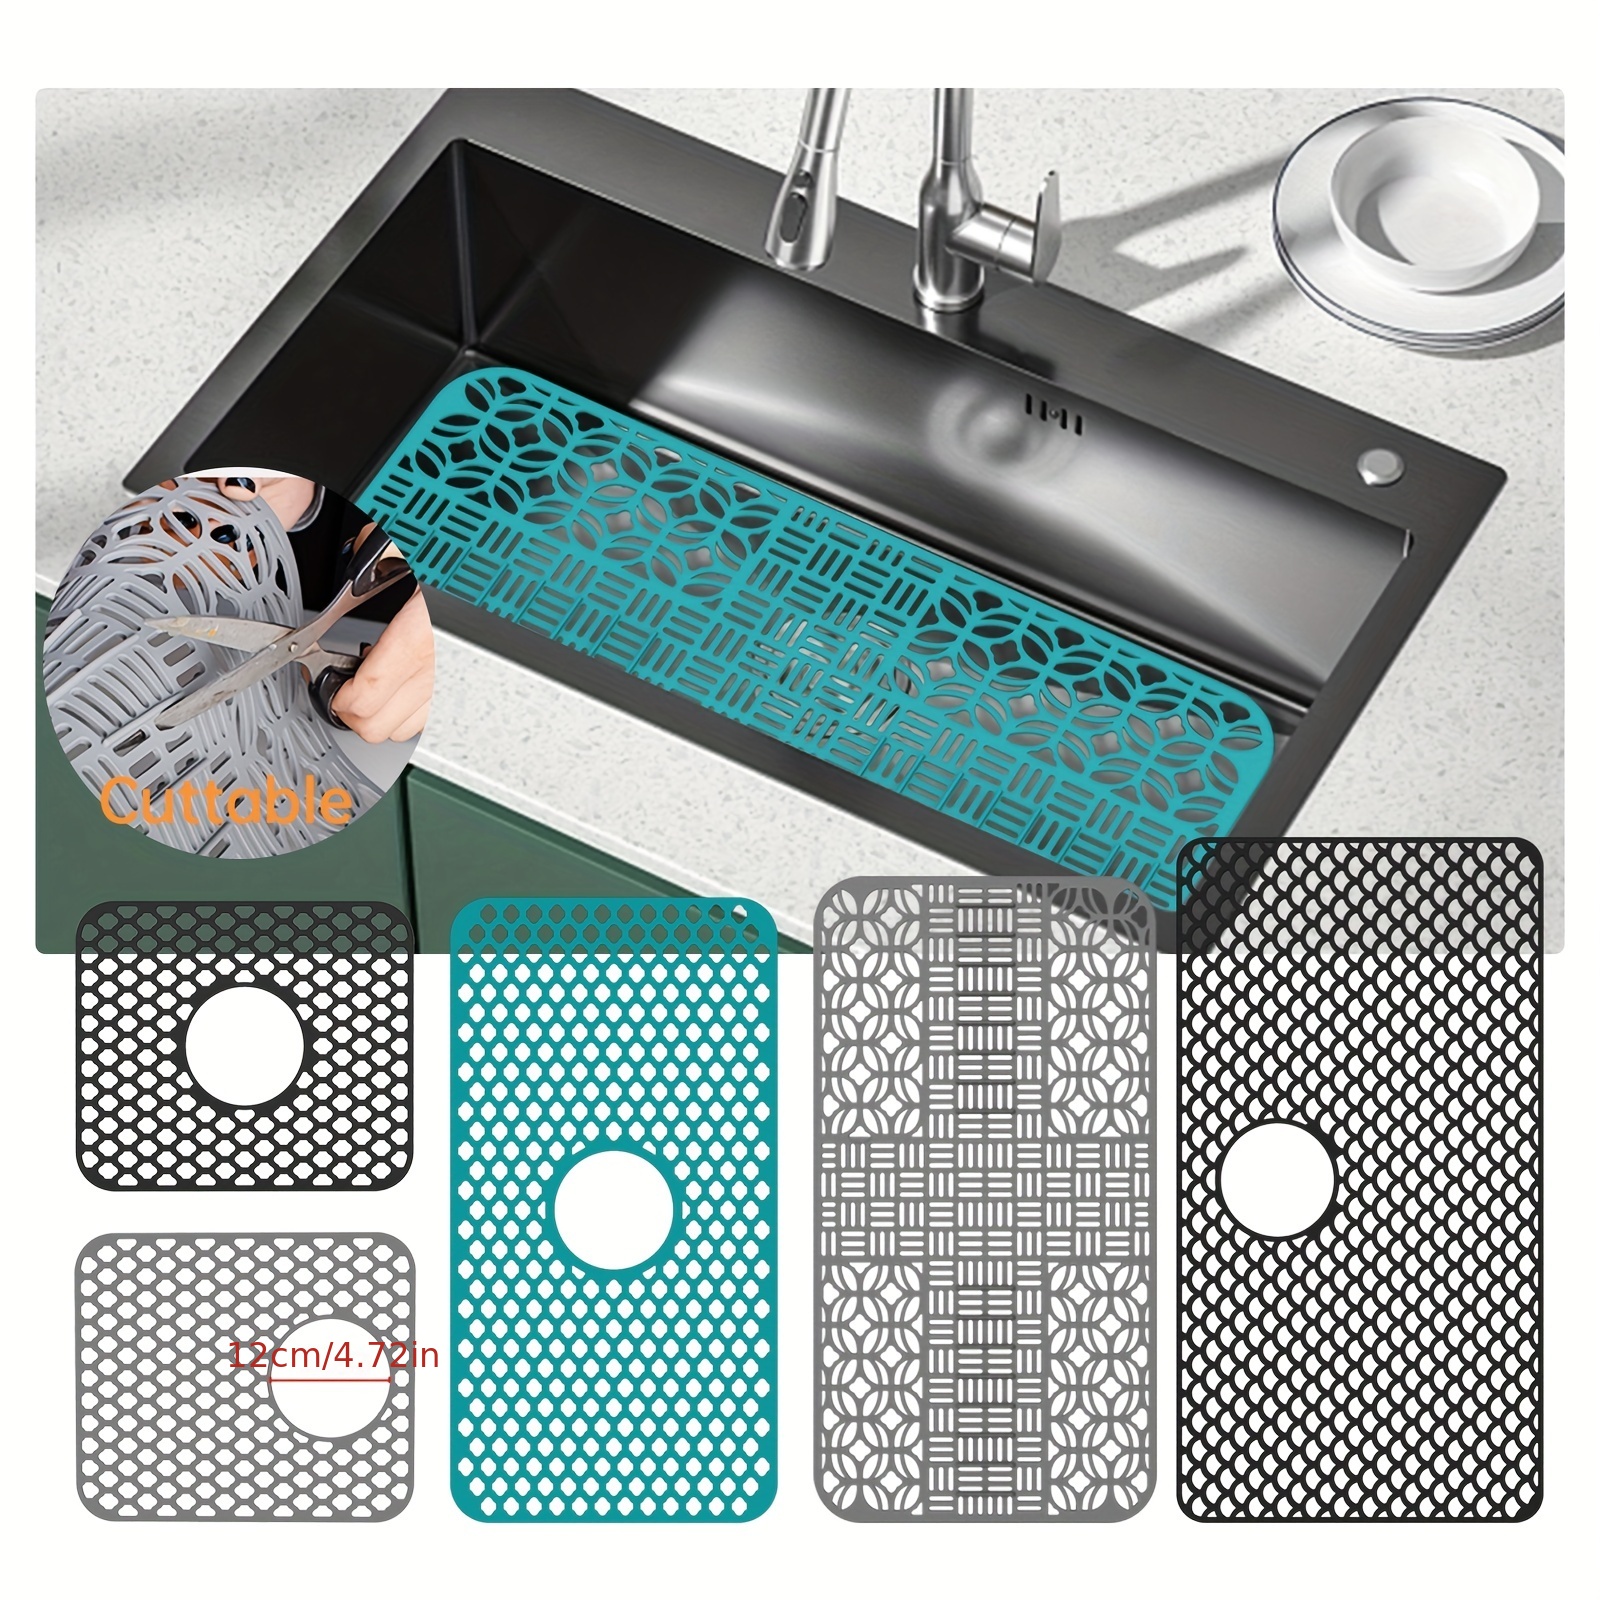 Ihvewuo Silicone Sink Protector Heat-Resistant Sink Liner Mat Anti-Slip Kitchen Sink Mats Sink Drainer Mat Sink Protector Mat Portable Practical for